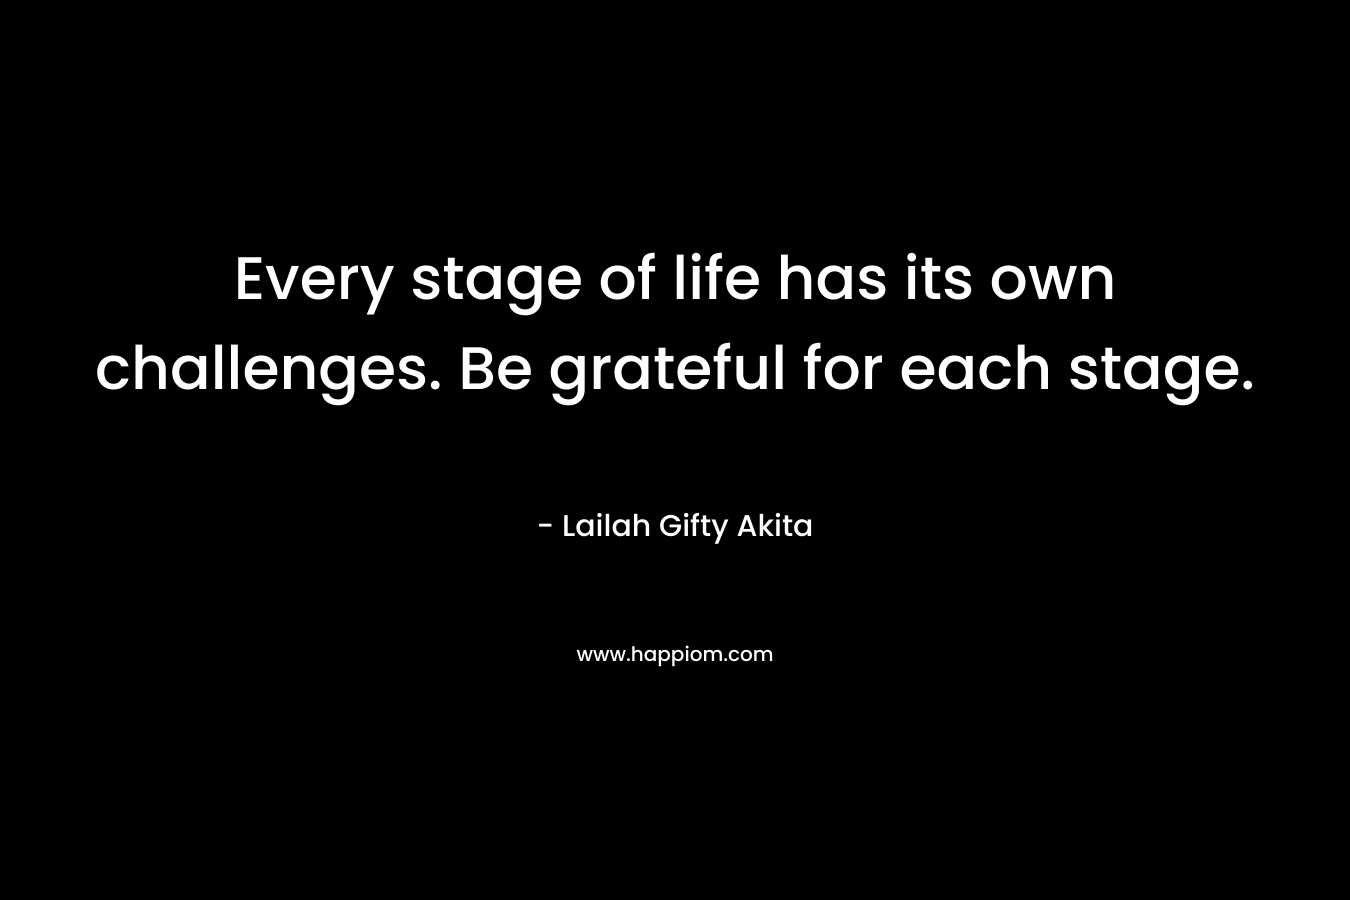 Every stage of life has its own challenges. Be grateful for each stage.